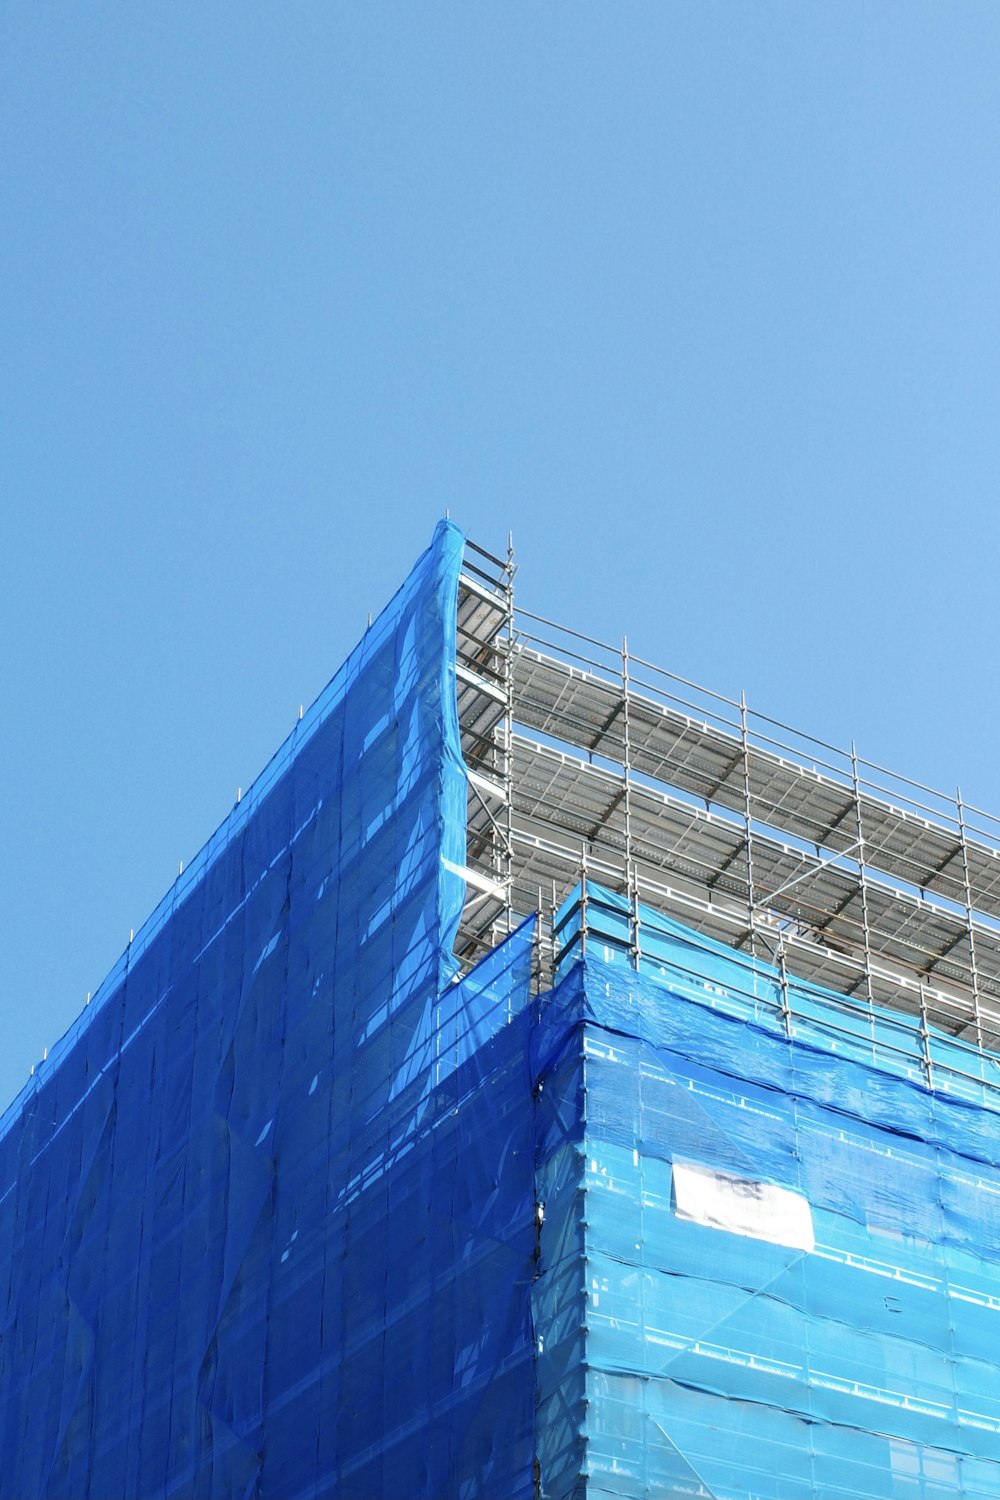 a large blue building under construction with scaffolding